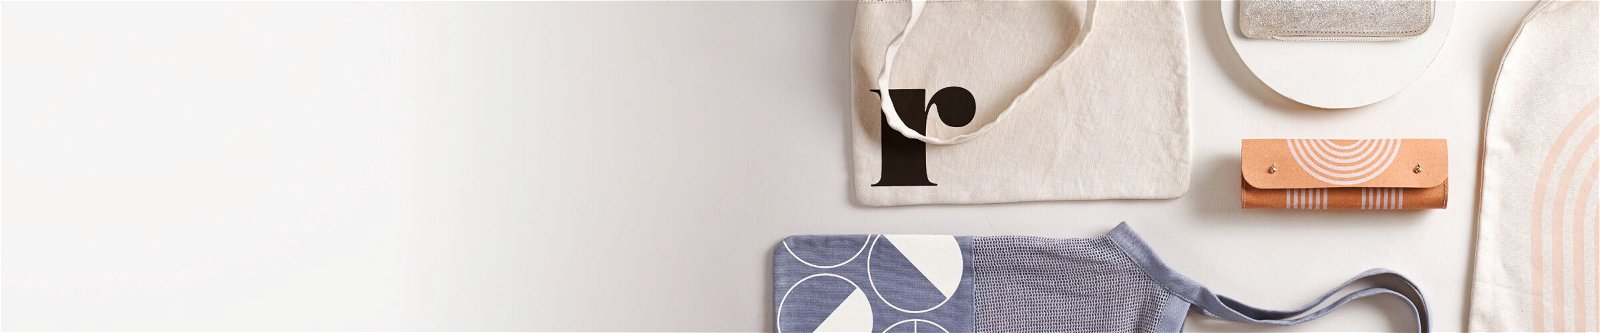 Overhead view of Focused Tote Bags and accessories